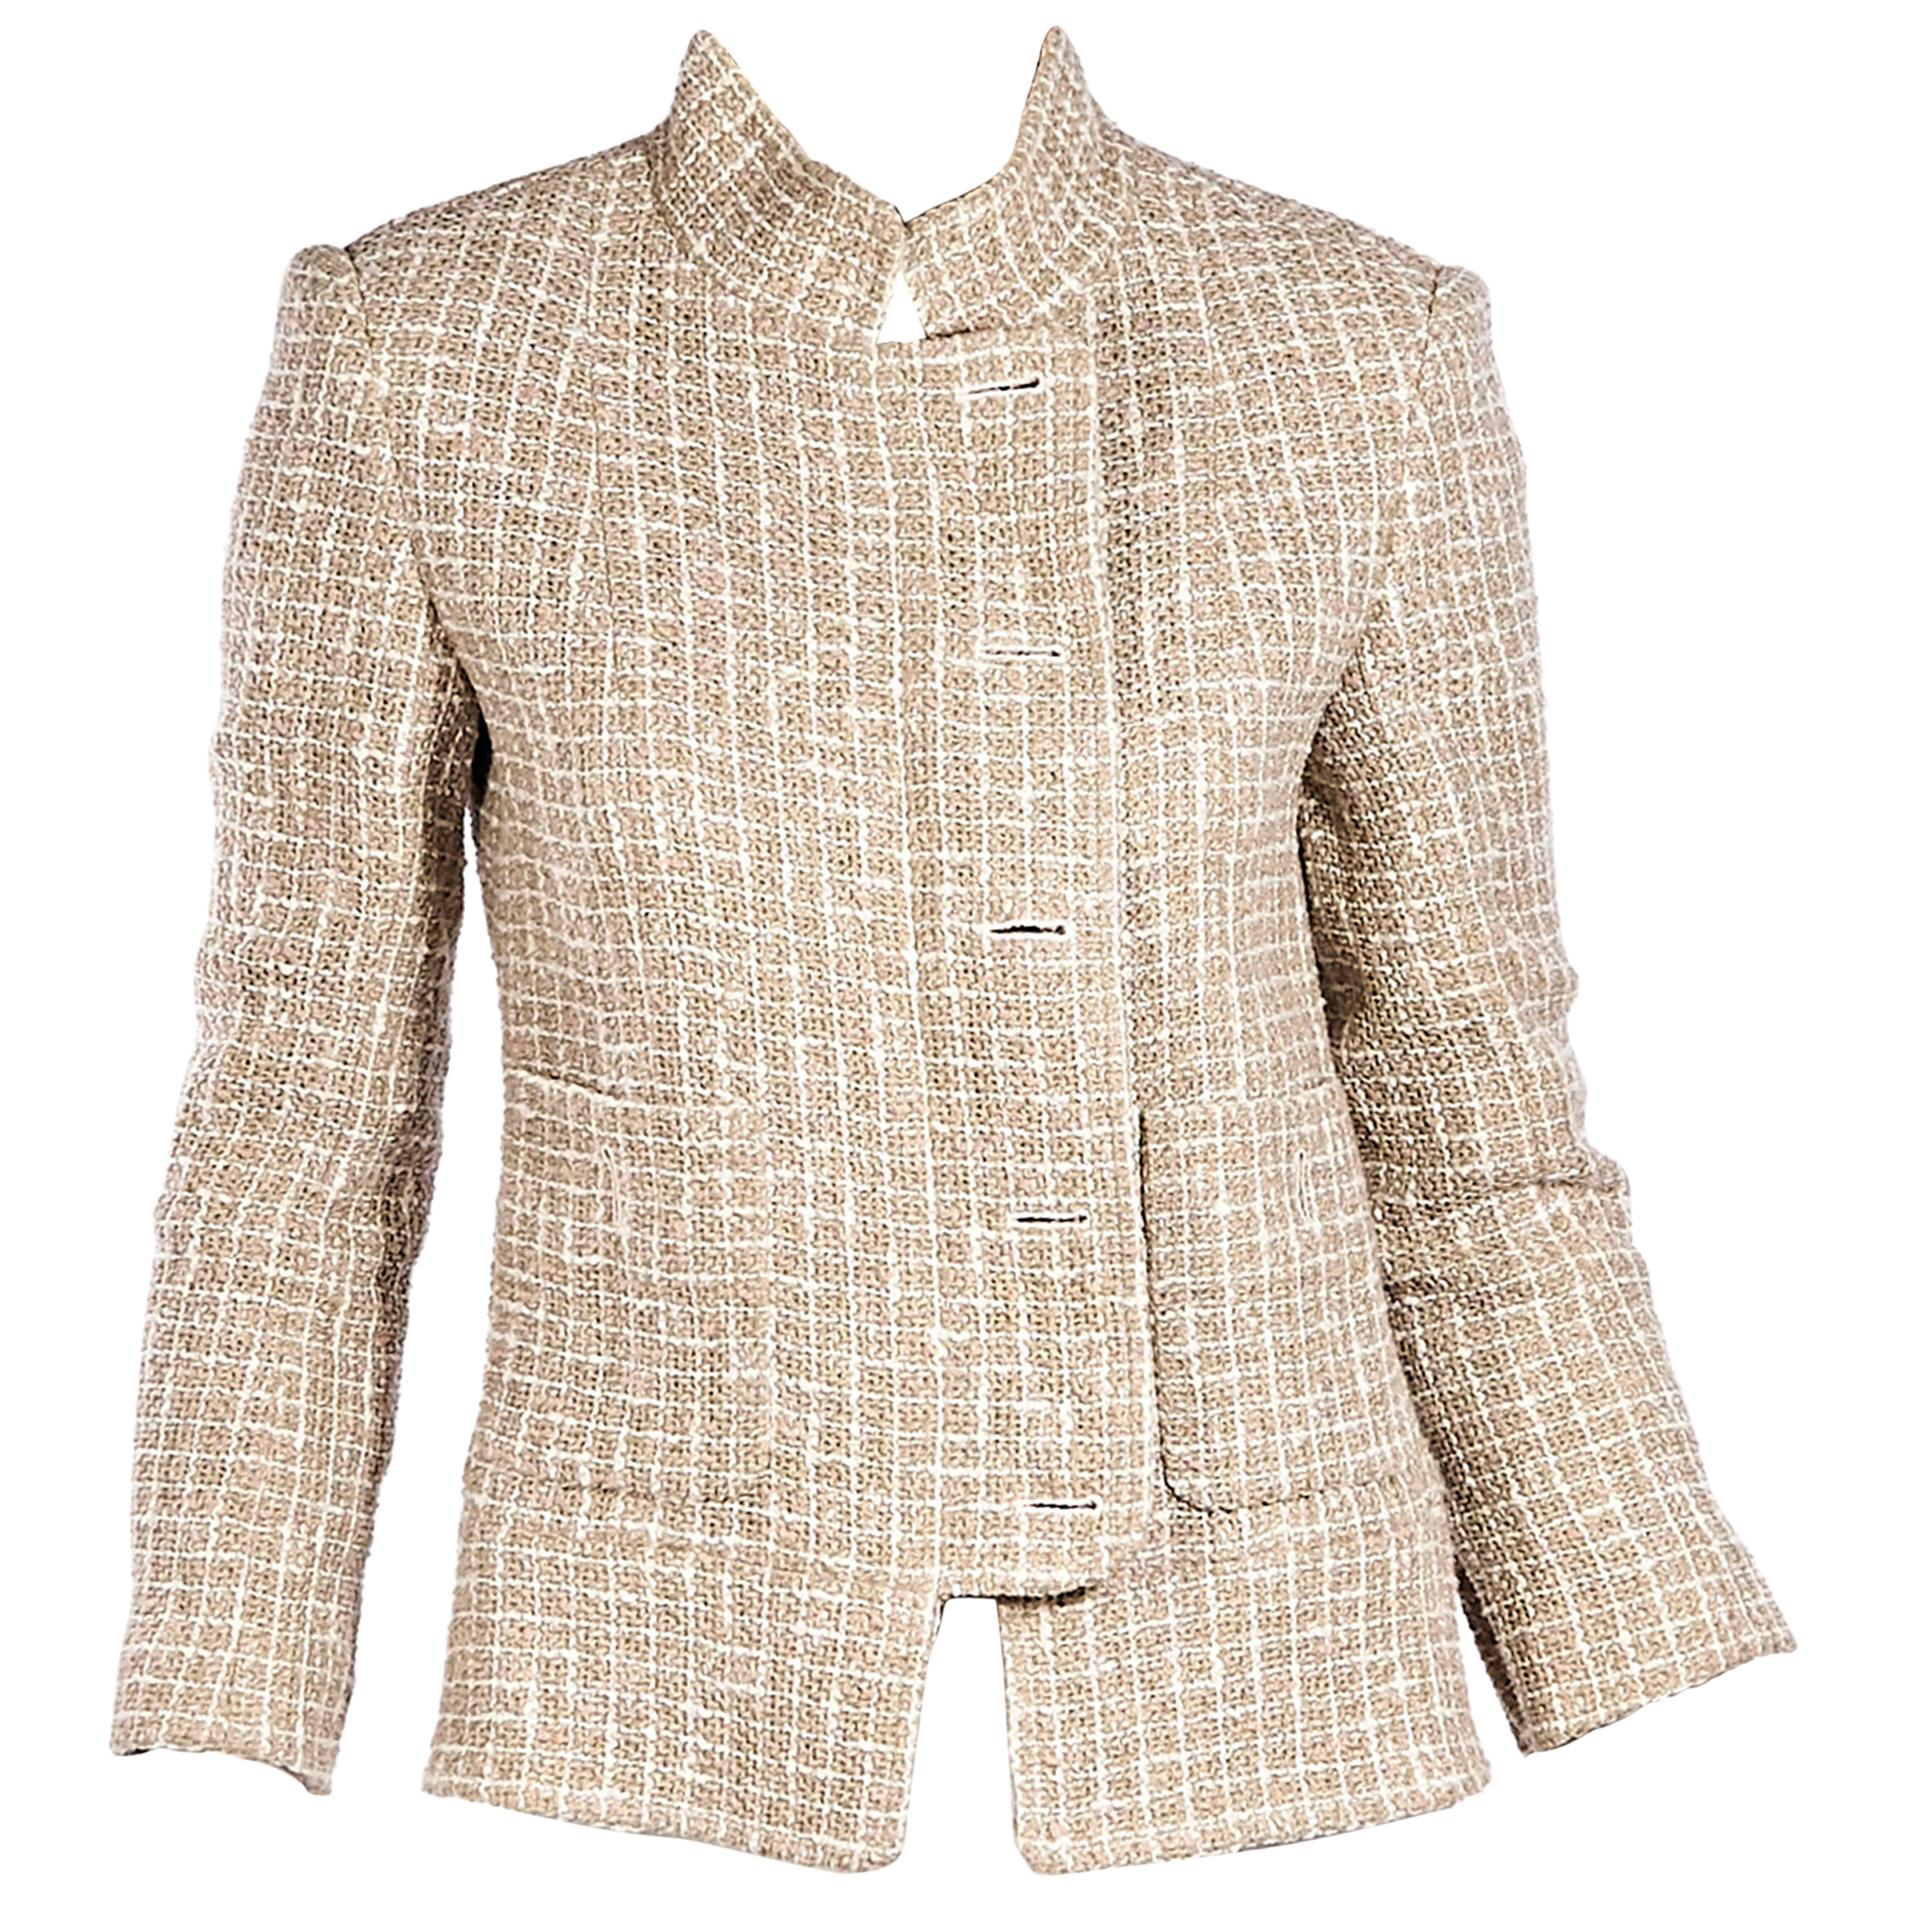 Tan And White Chanel Tweed Jacket